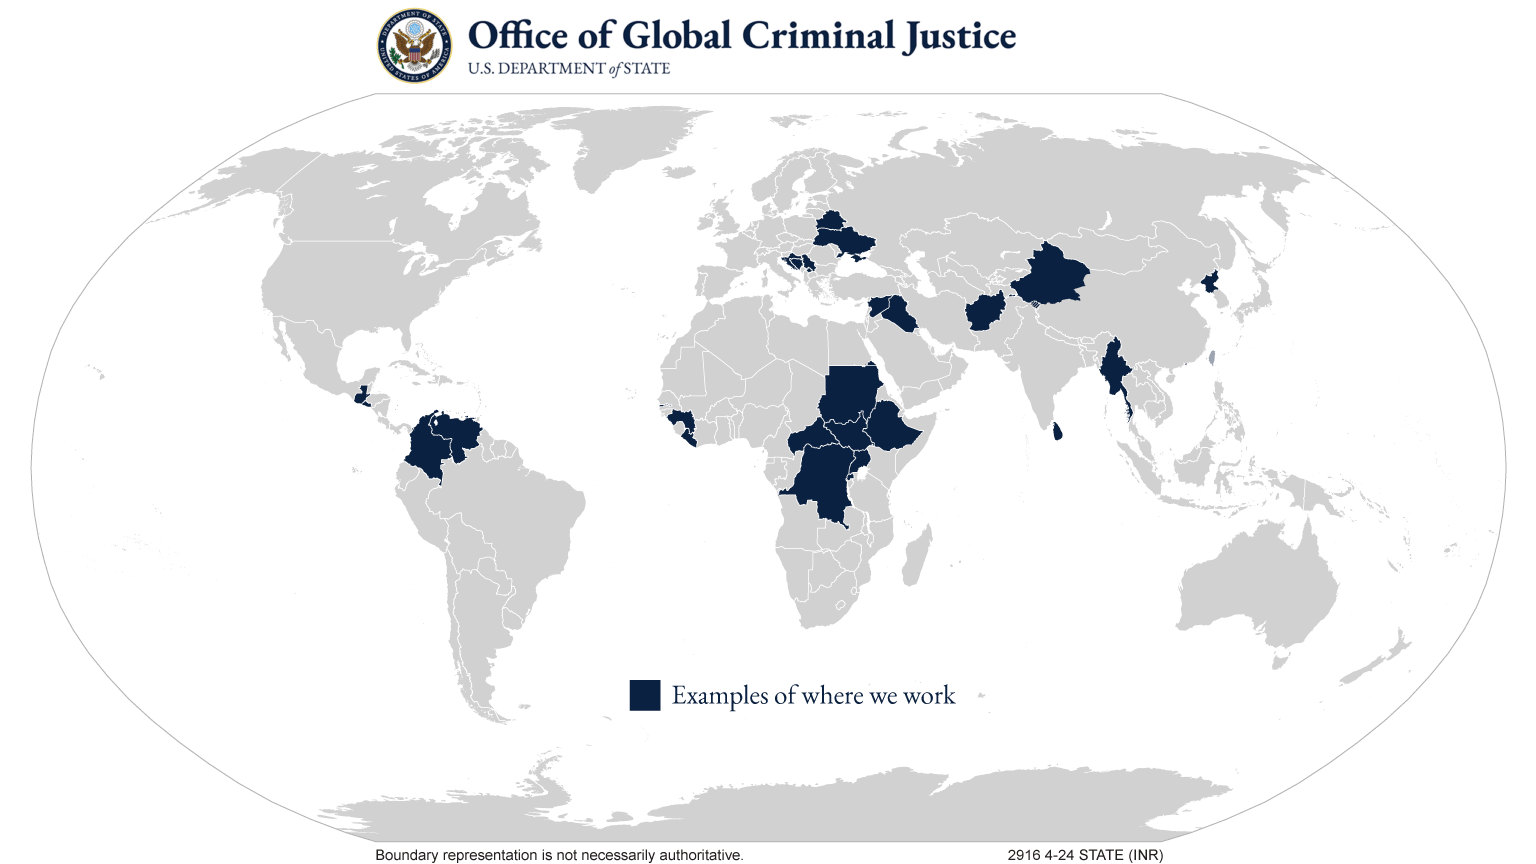 World map highlighting some countries and areas the Office of Global Criminal Justice engages with. Boundary representation is not necessarily authoritative.